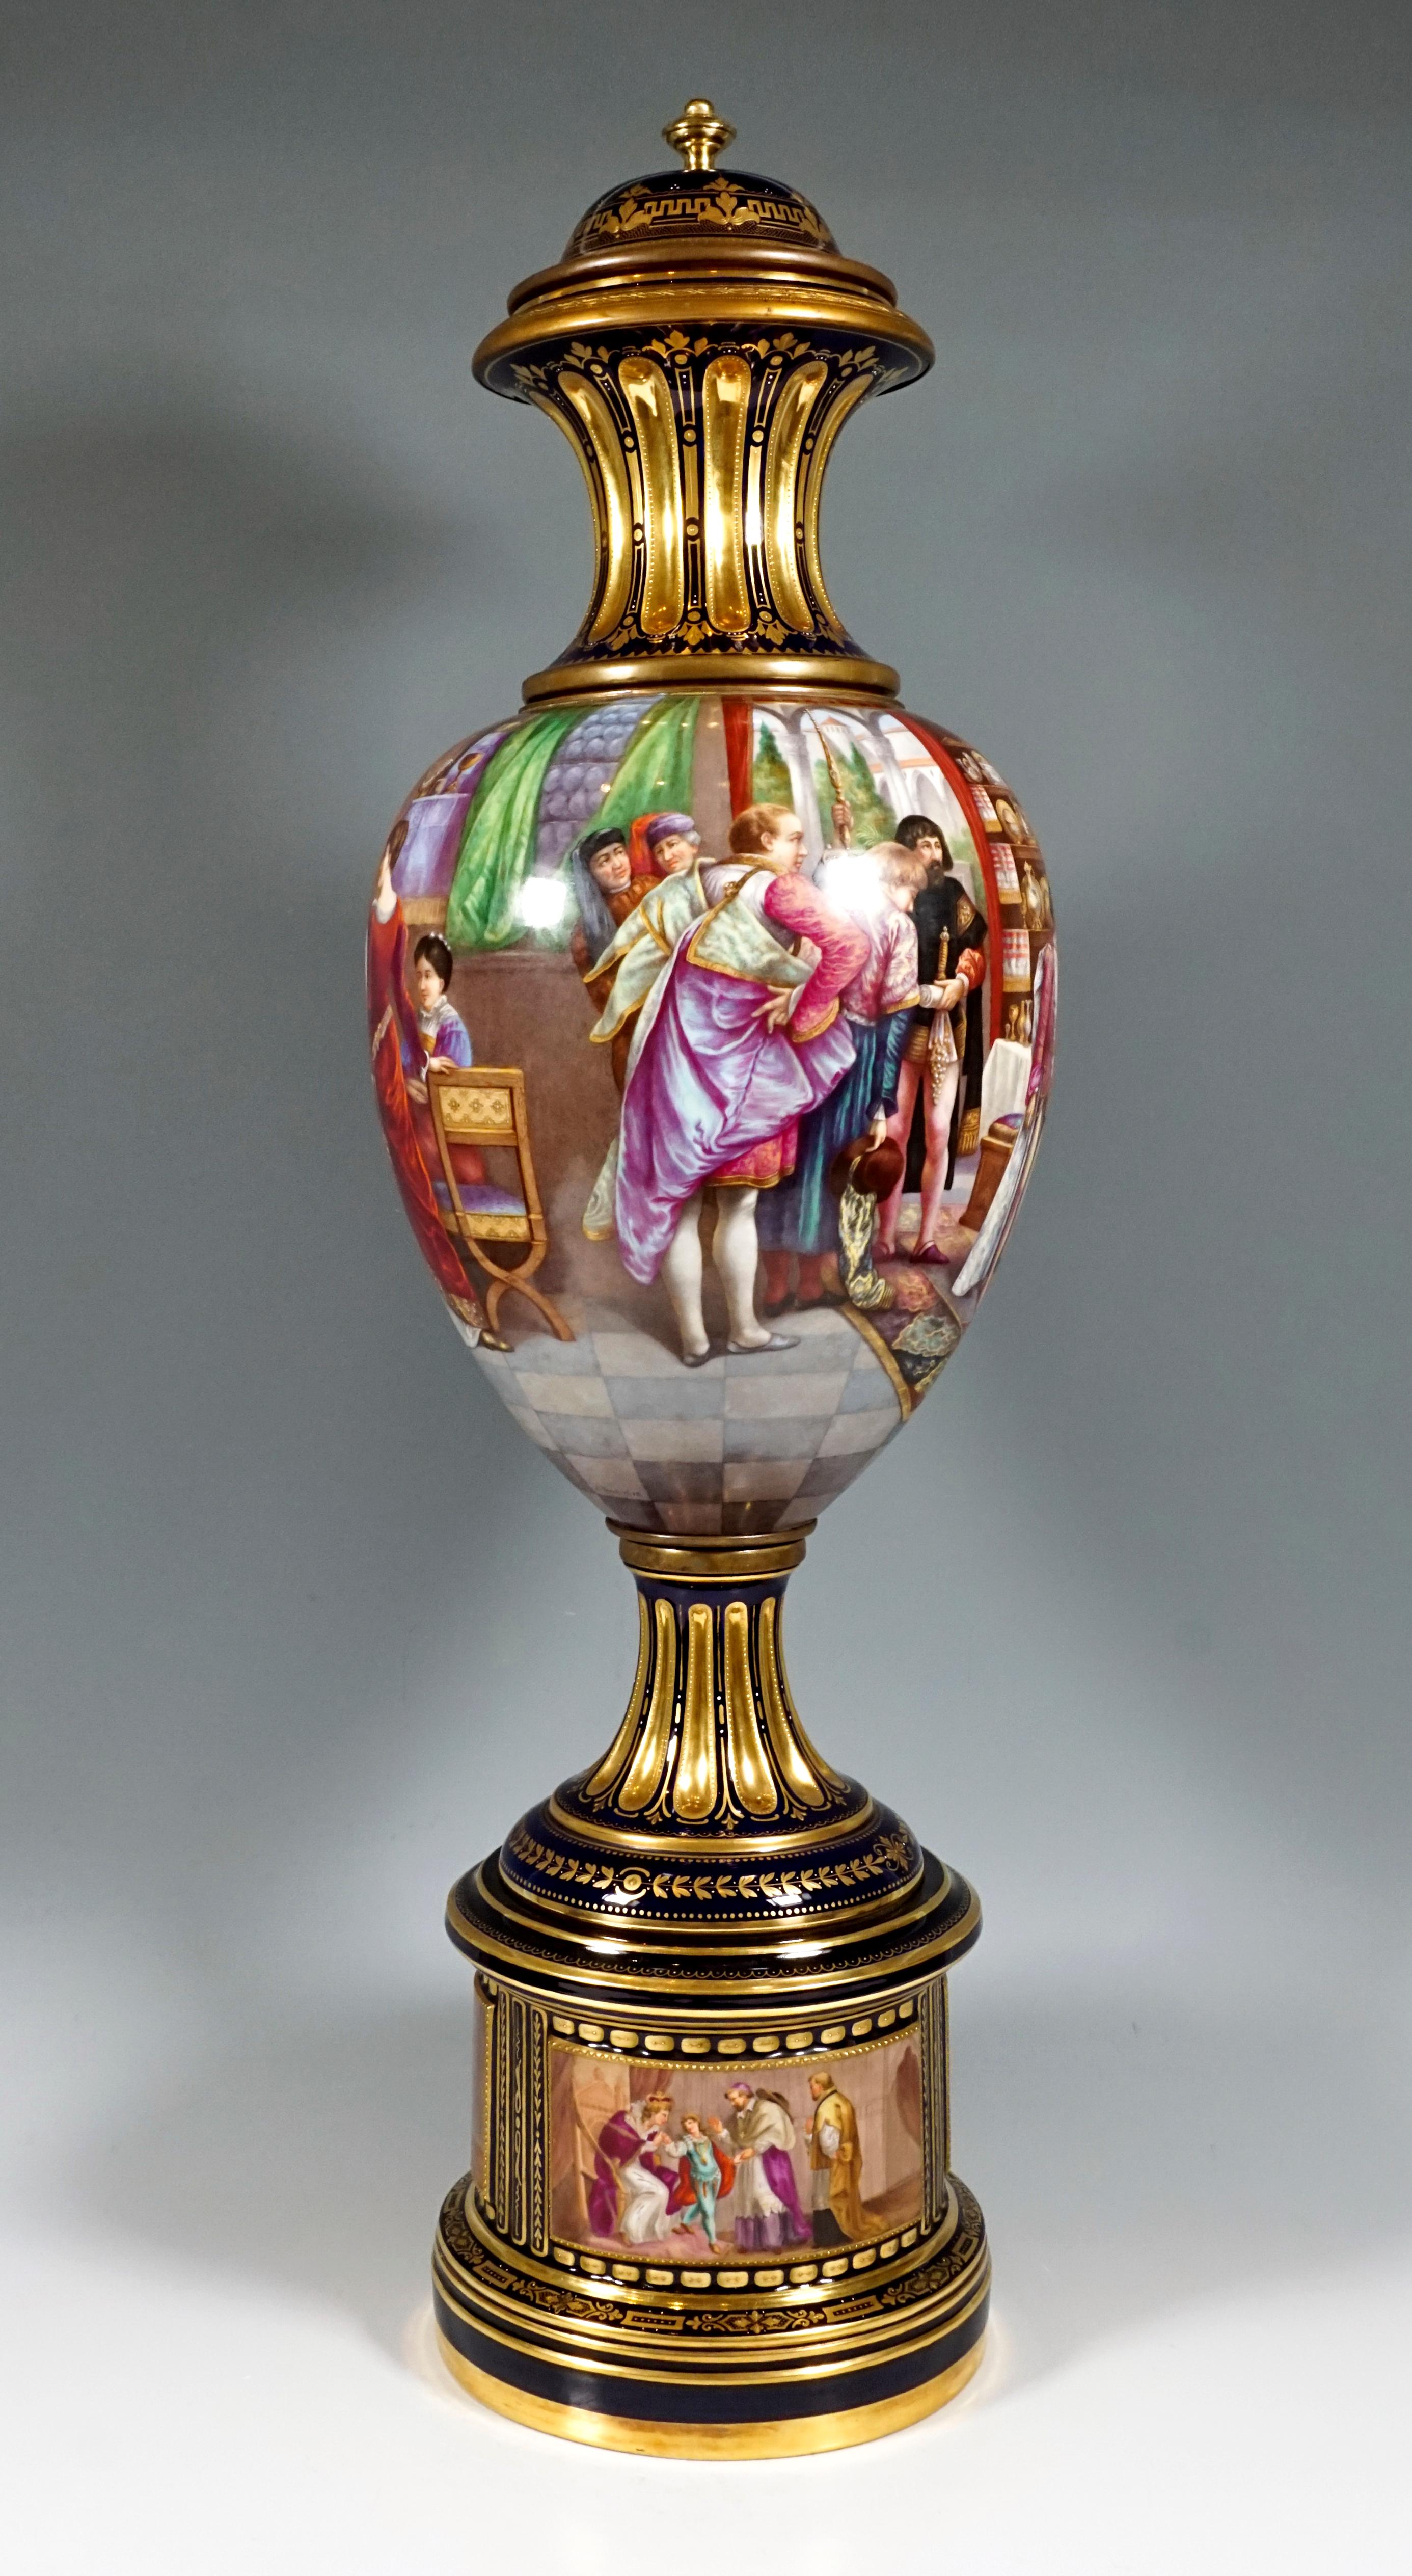 Romantic High KPM Berlin Lidded Porcelain Vase with Colourfully Painted Scenery ca 1918